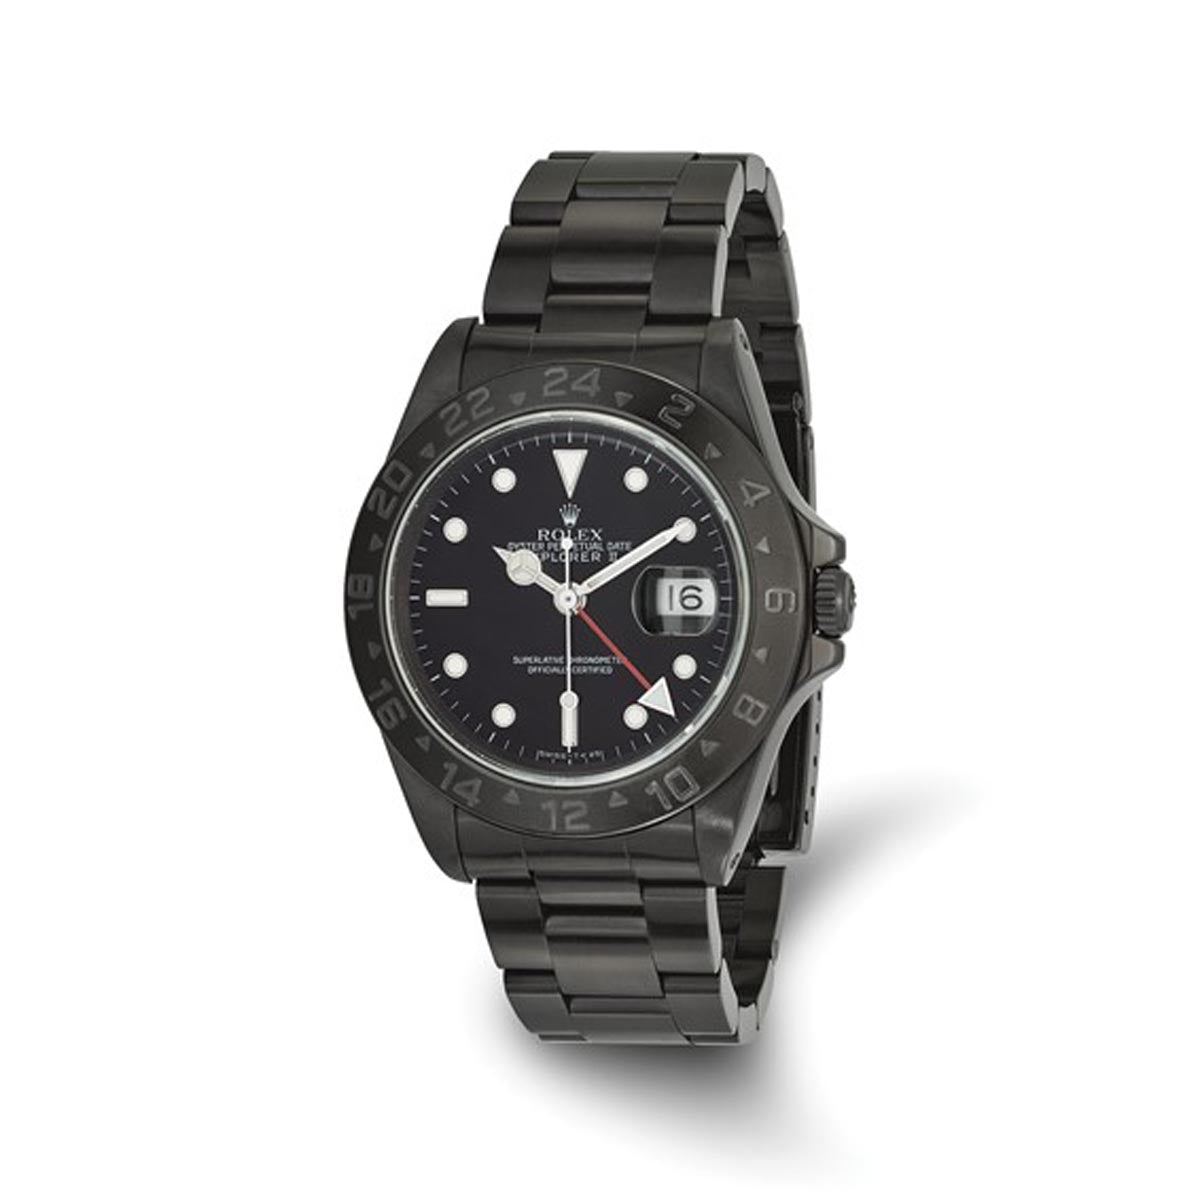 Pre Owned Mens Rolex Oyster Perpetual Explorer II with Black Dial and Black Stainless Steel with DLC Coating Oyster Bracelet (automatic movement)